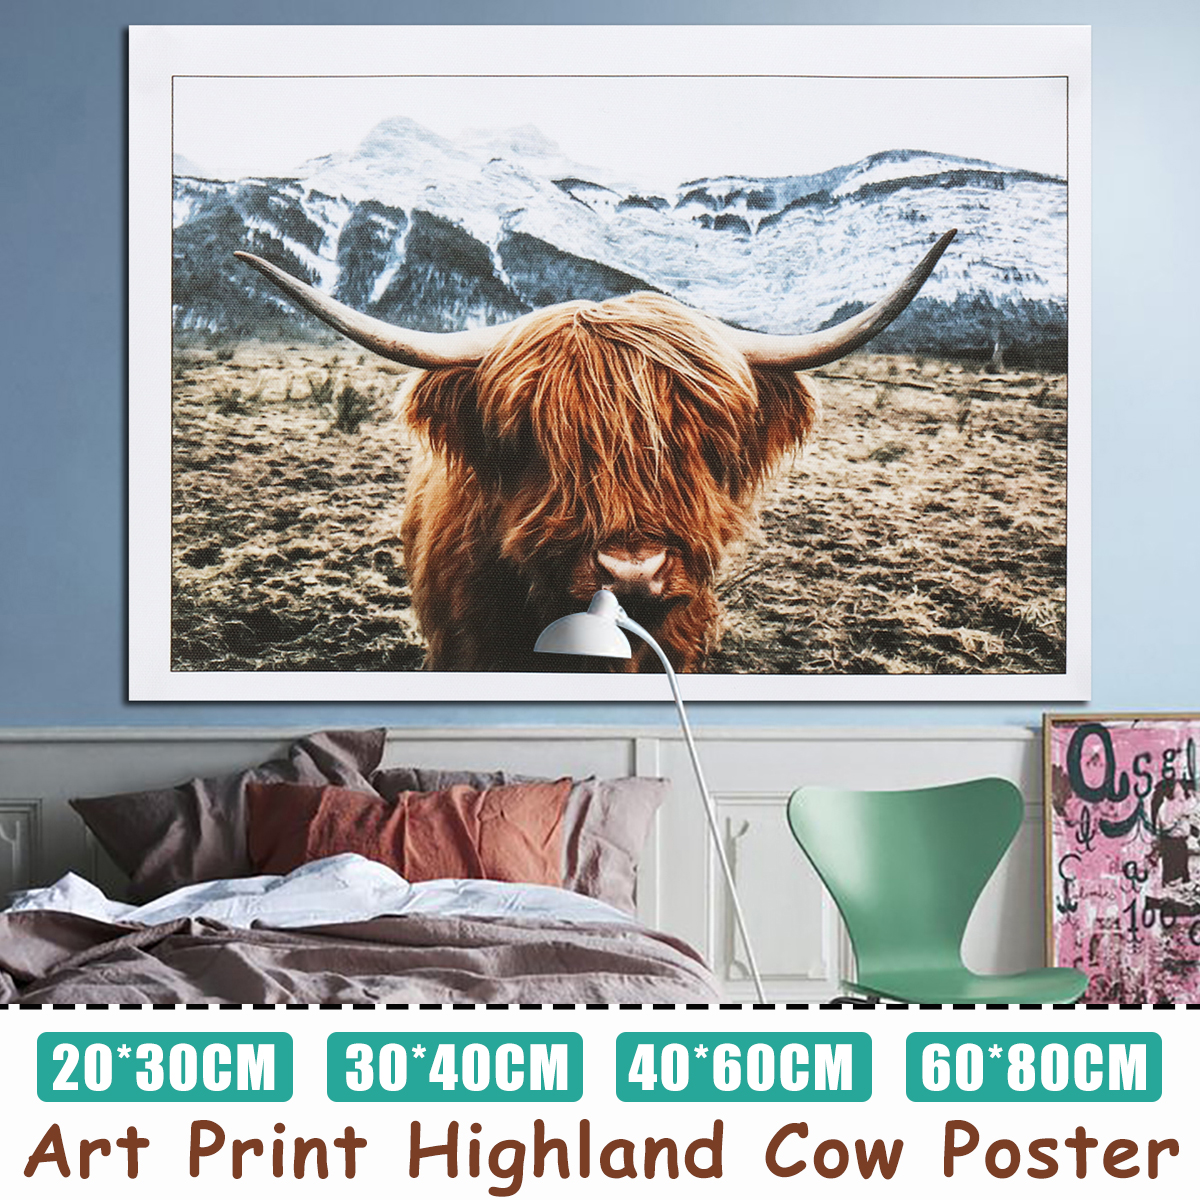 1-Piece-Canvas-Print-Painting-Highland-Cow-Poster-Wall-Decorative-Printing-Art-Pictures-Frameless-Wa-1743443-1